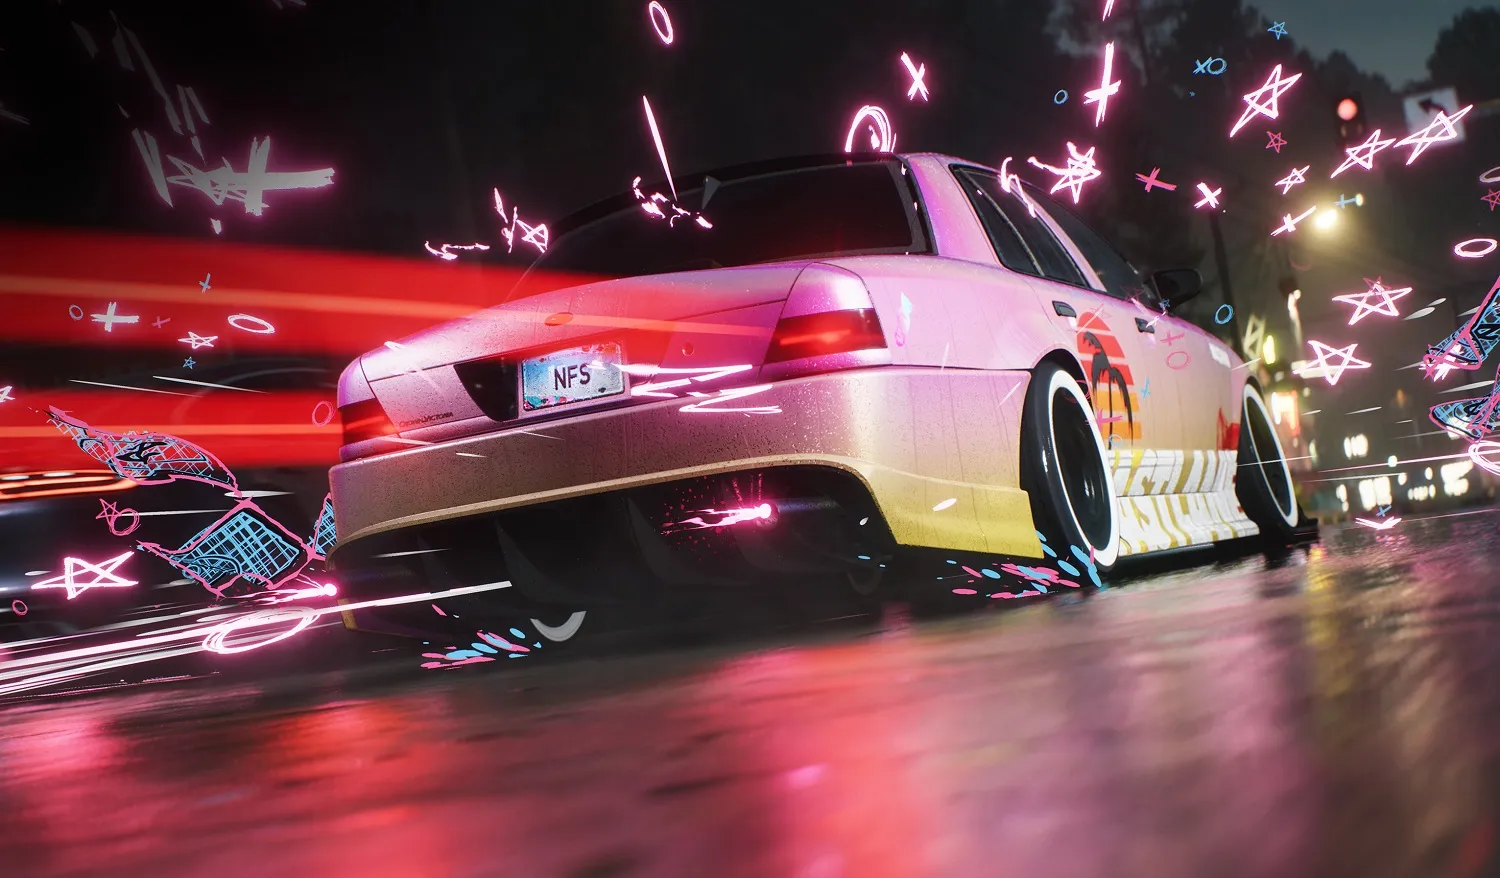 Need For Speed Unbound Review